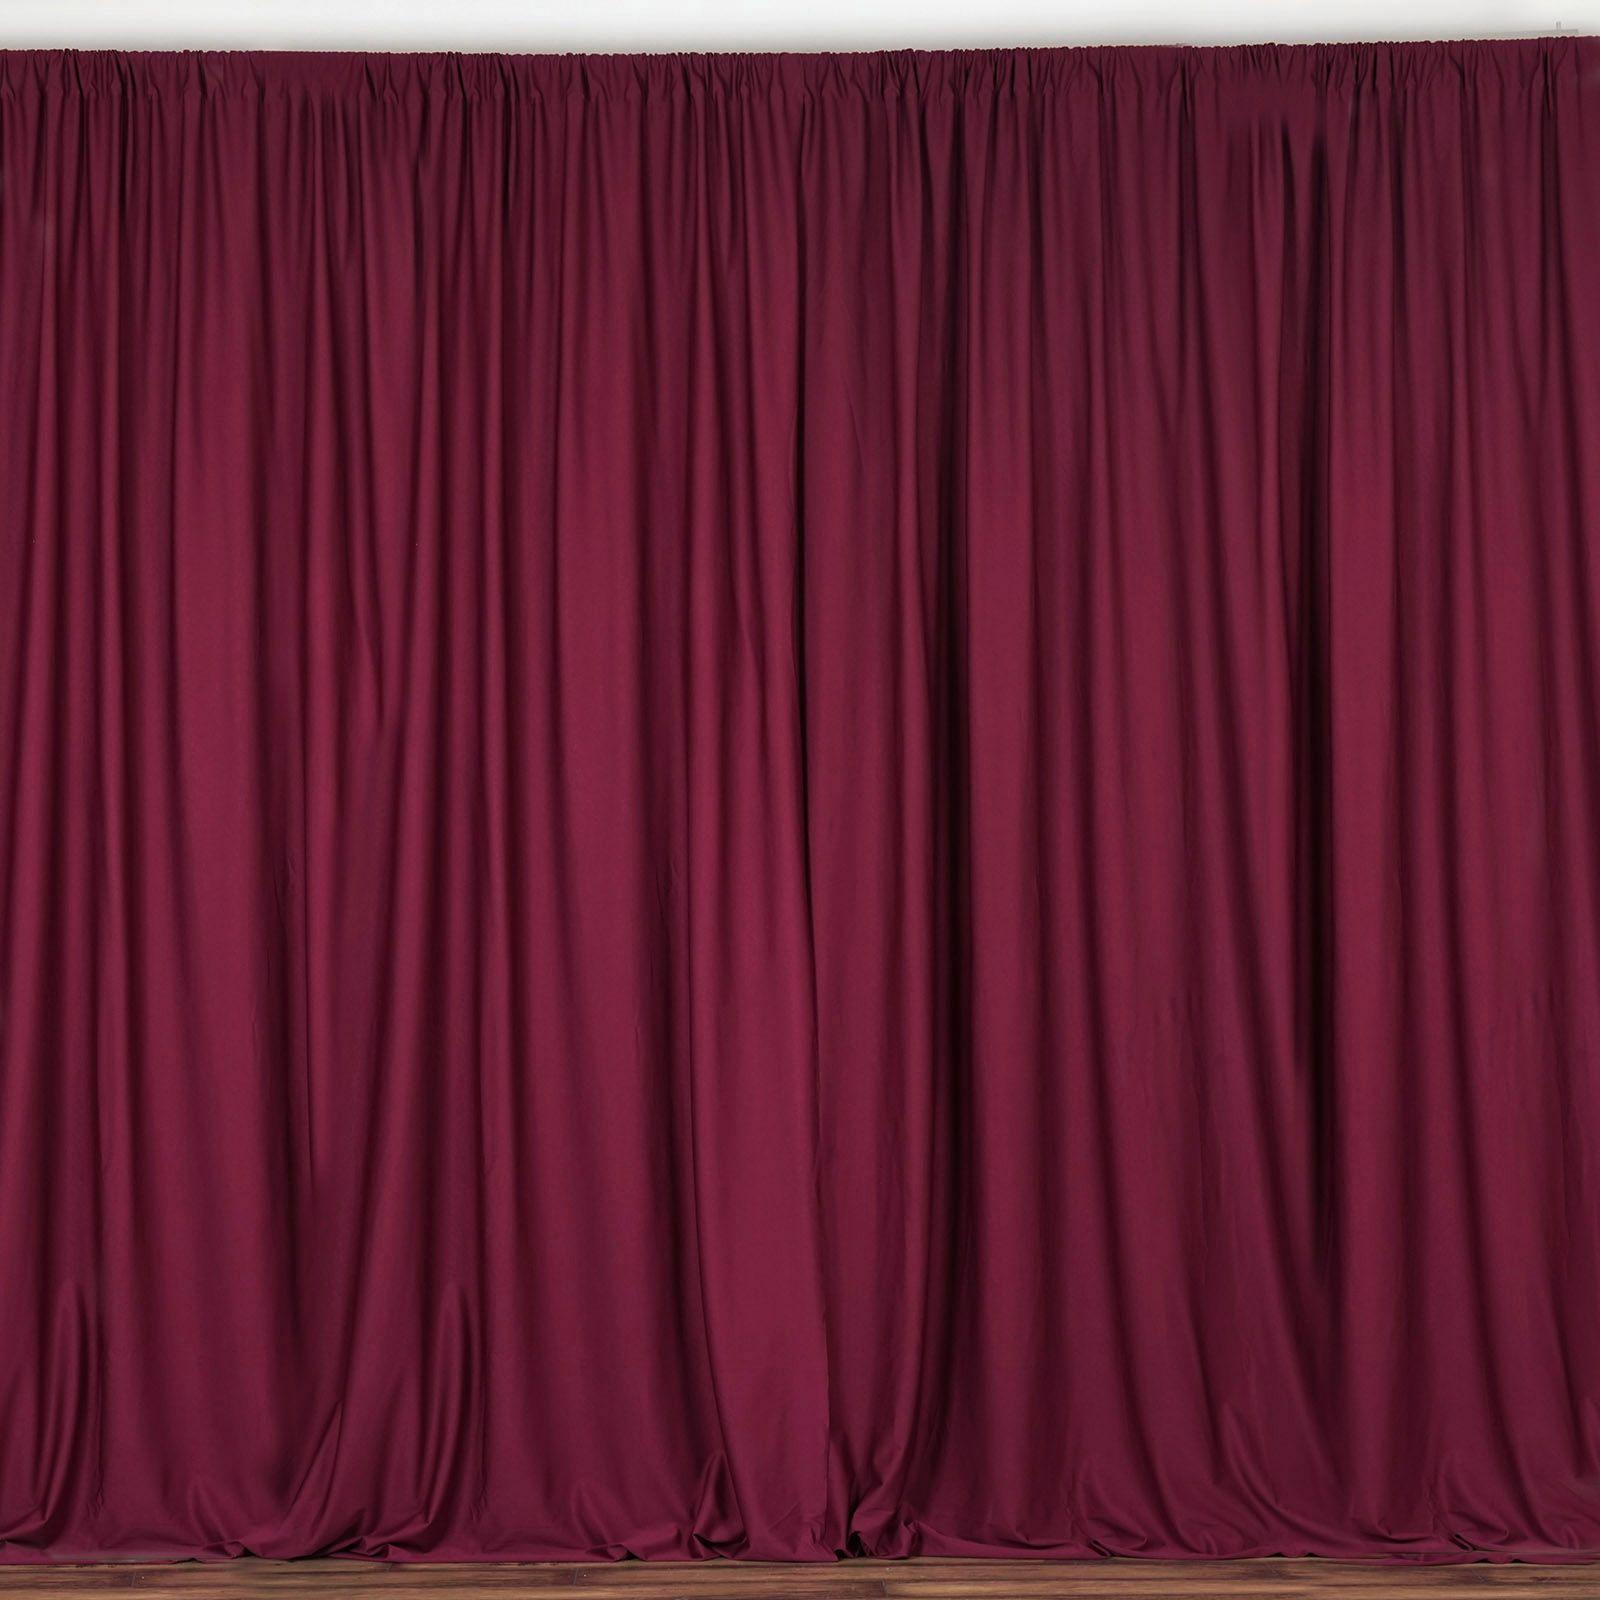 Polyester Professional BACKDROP CURTAINS 10ft x 10ft Background